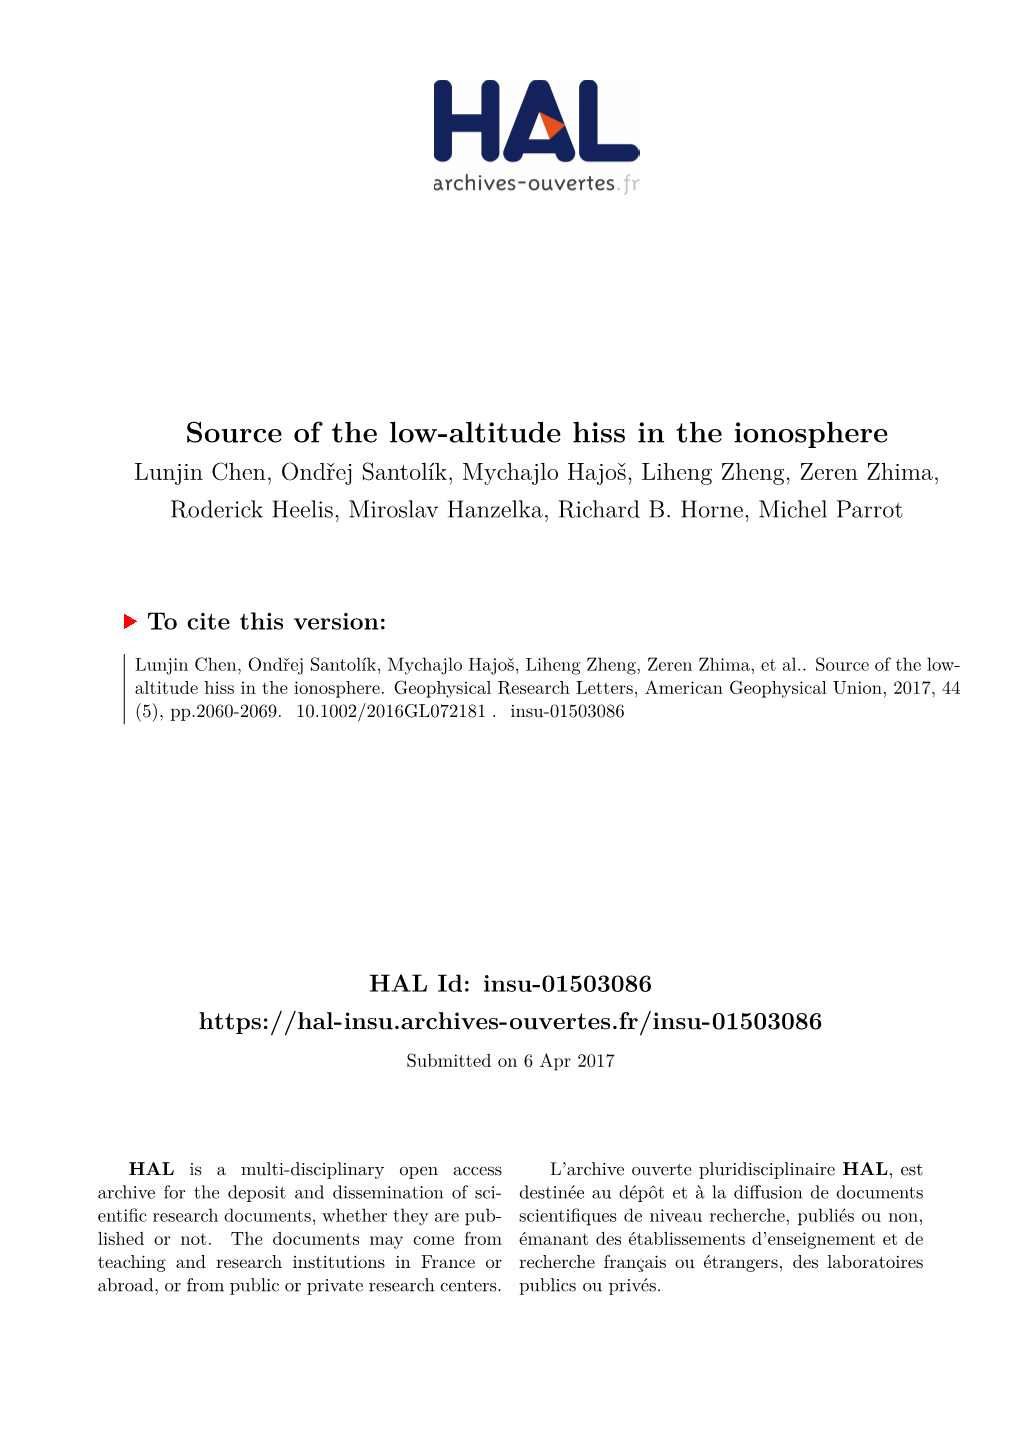 Source of the Low-Altitude Hiss in the Ionosphere